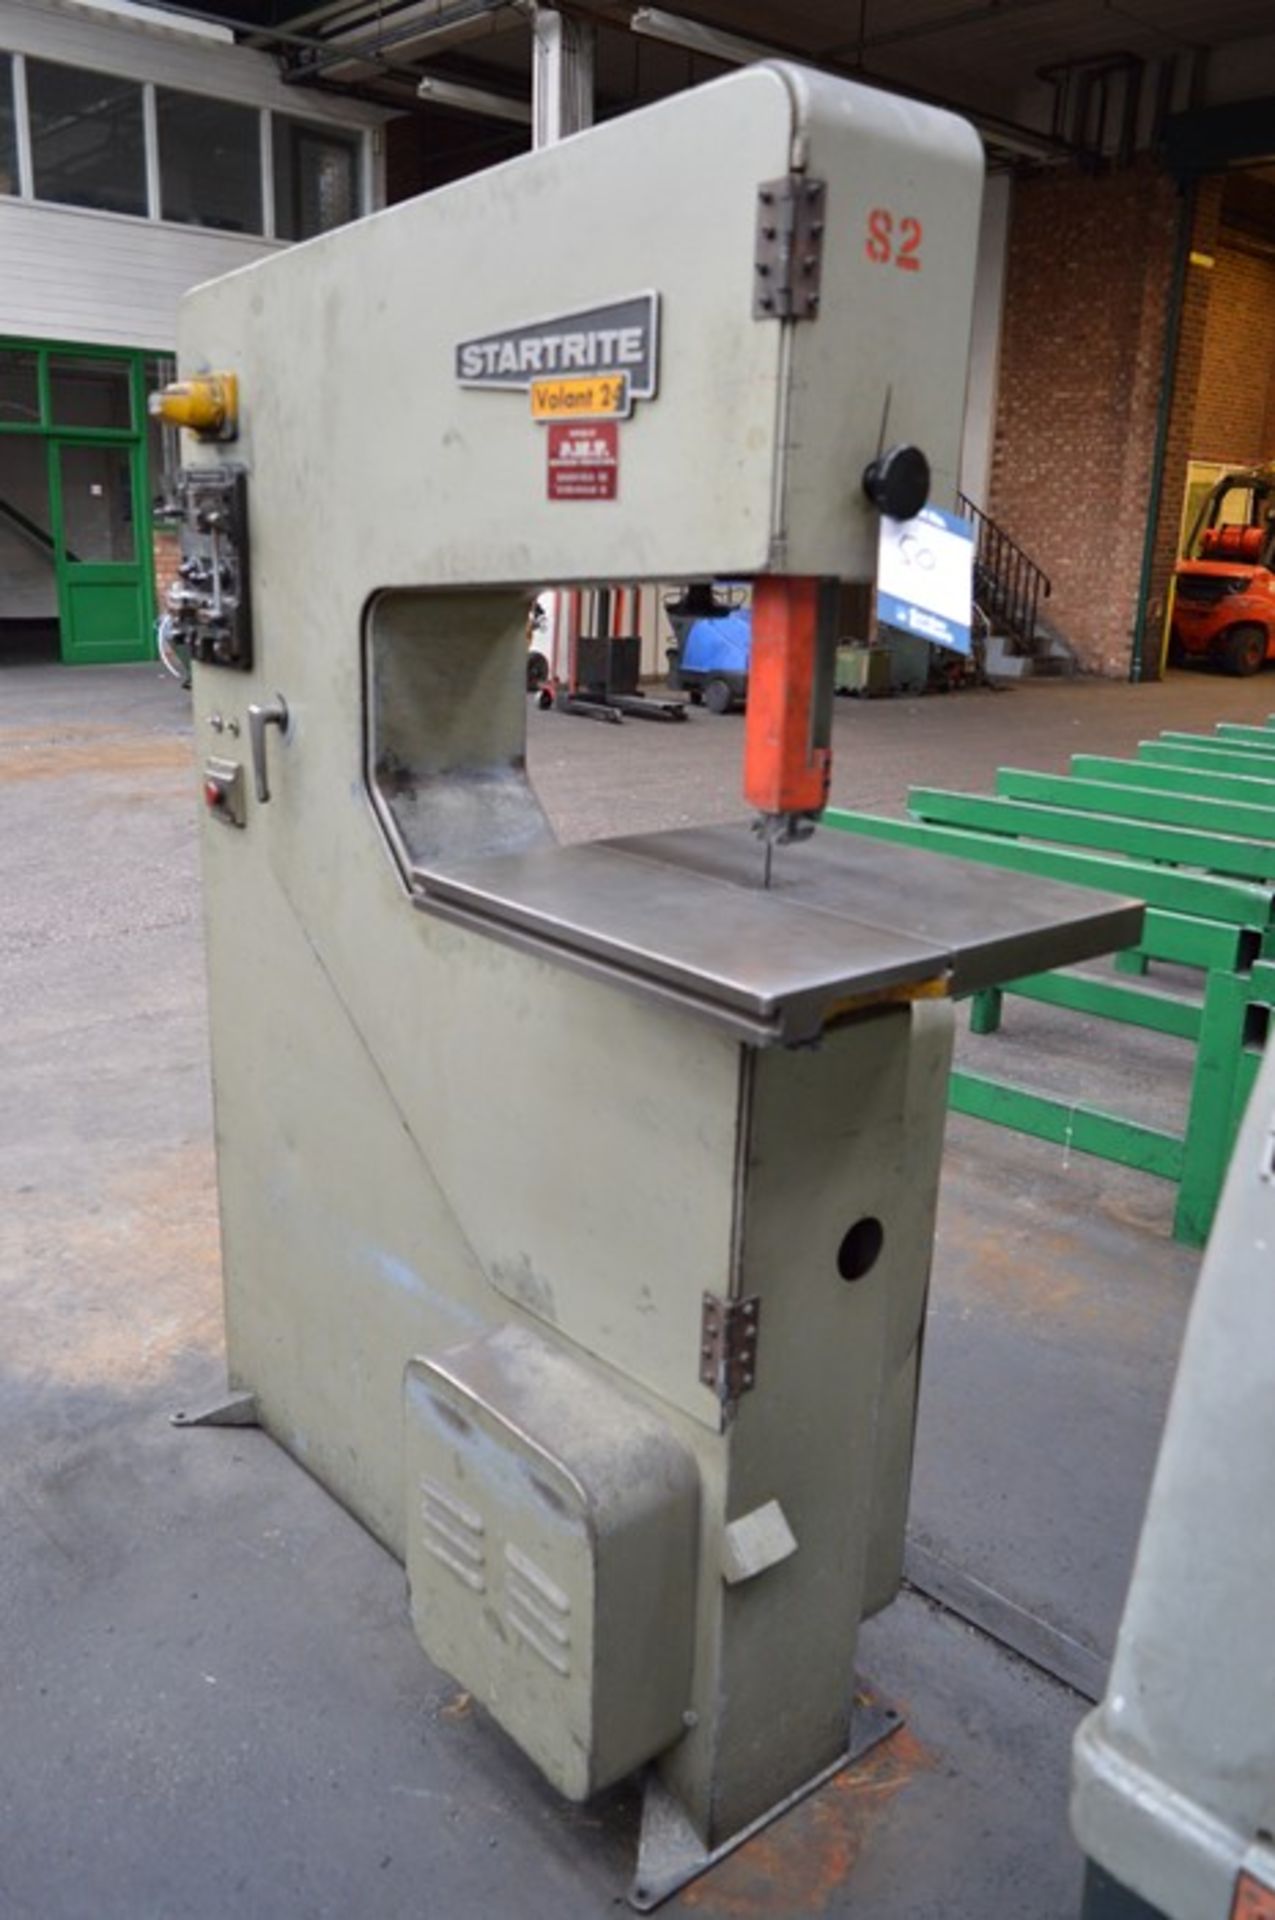 Startrite, Volant 24, vertical bandsaw, Serial No. 25940 with Ideal, BSO/16 blade welder, Serial No.